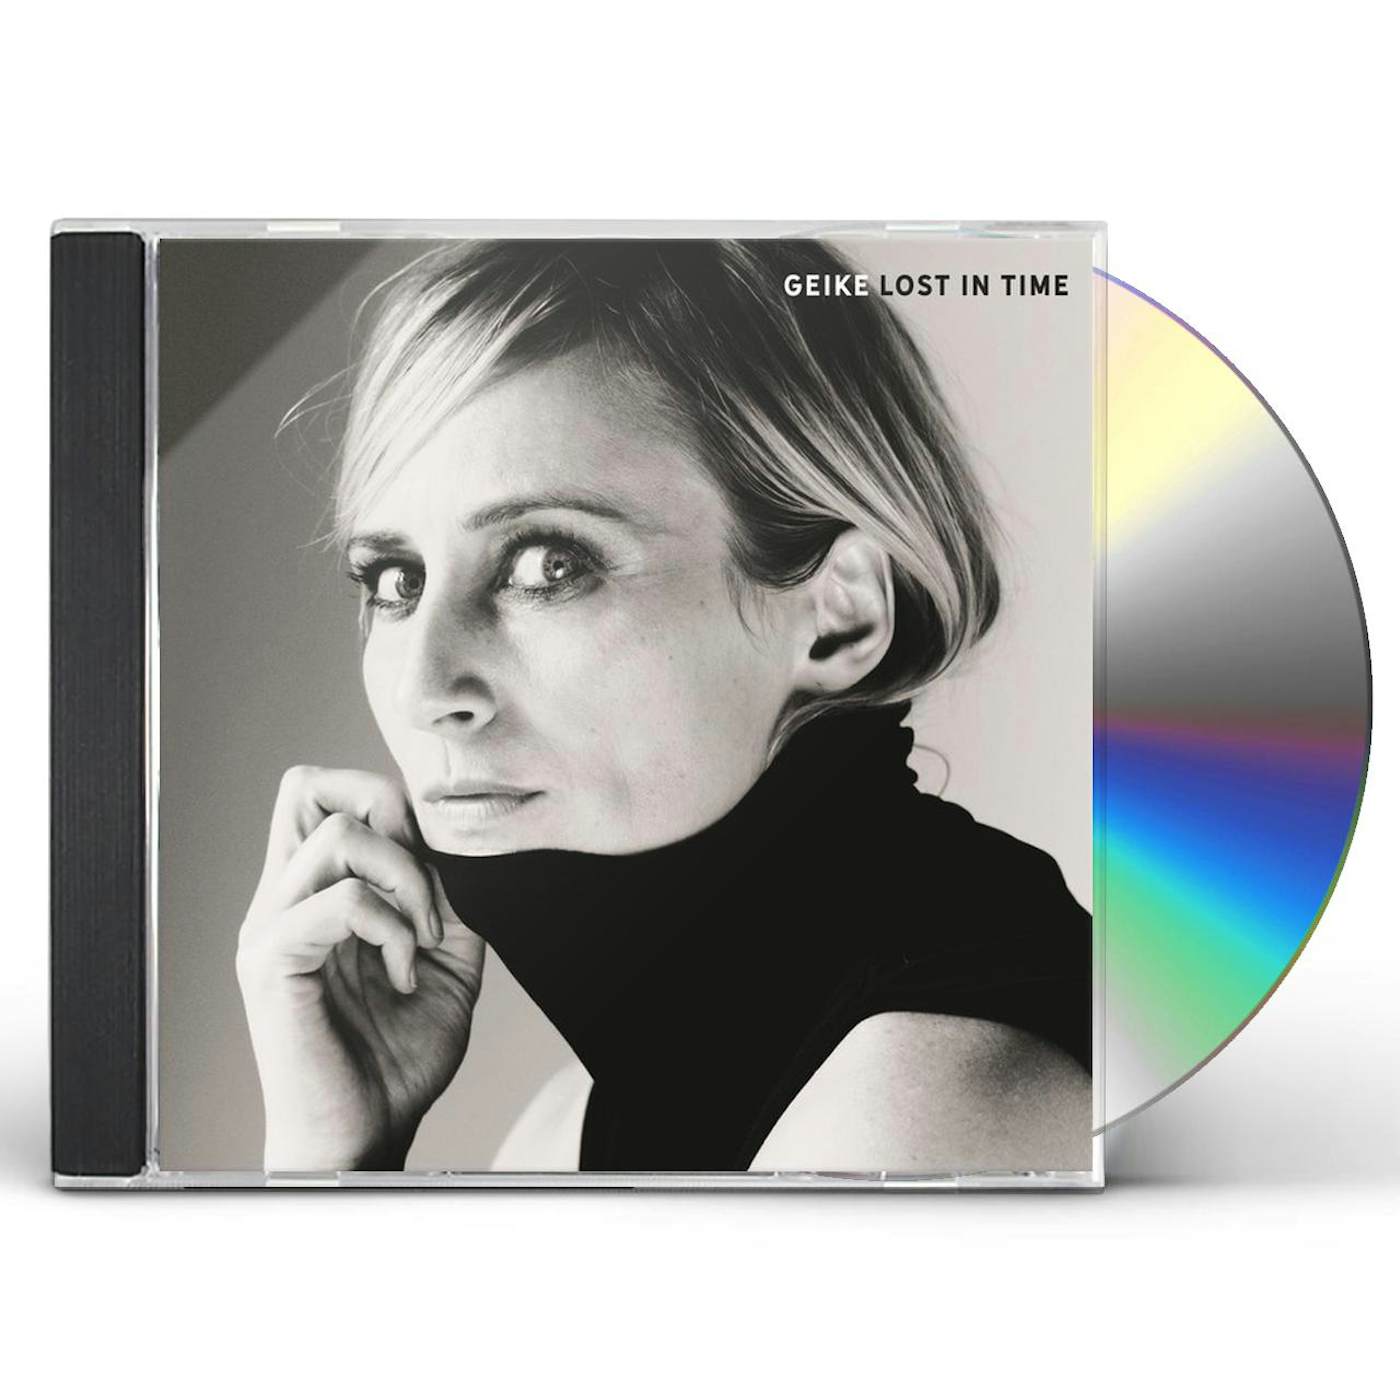 Geike LOST IN TIME CD